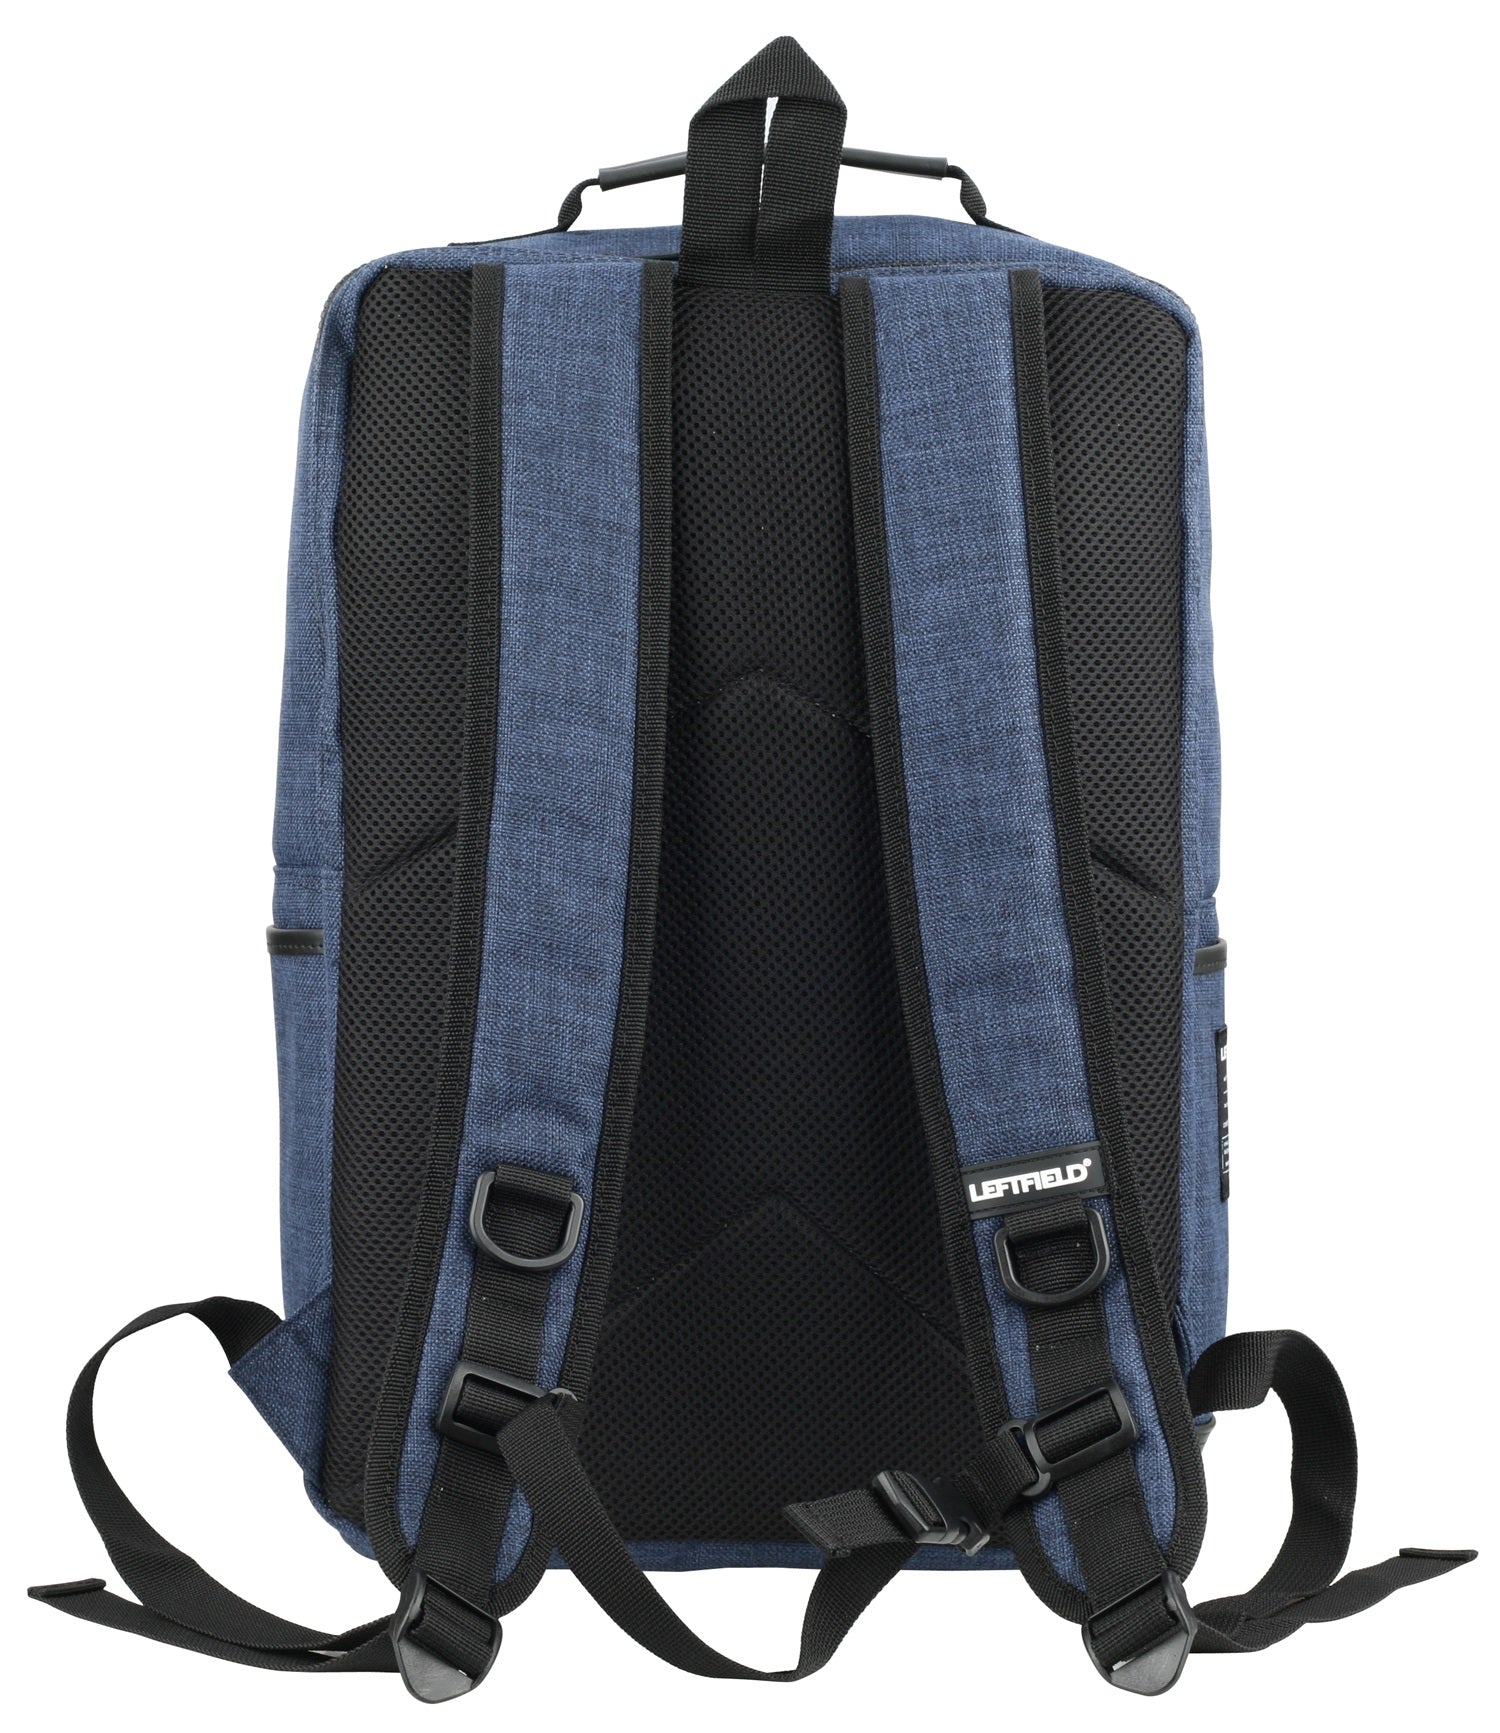 Navy Blue Casual Canvas Business Backpacks Laptop School Bookbags